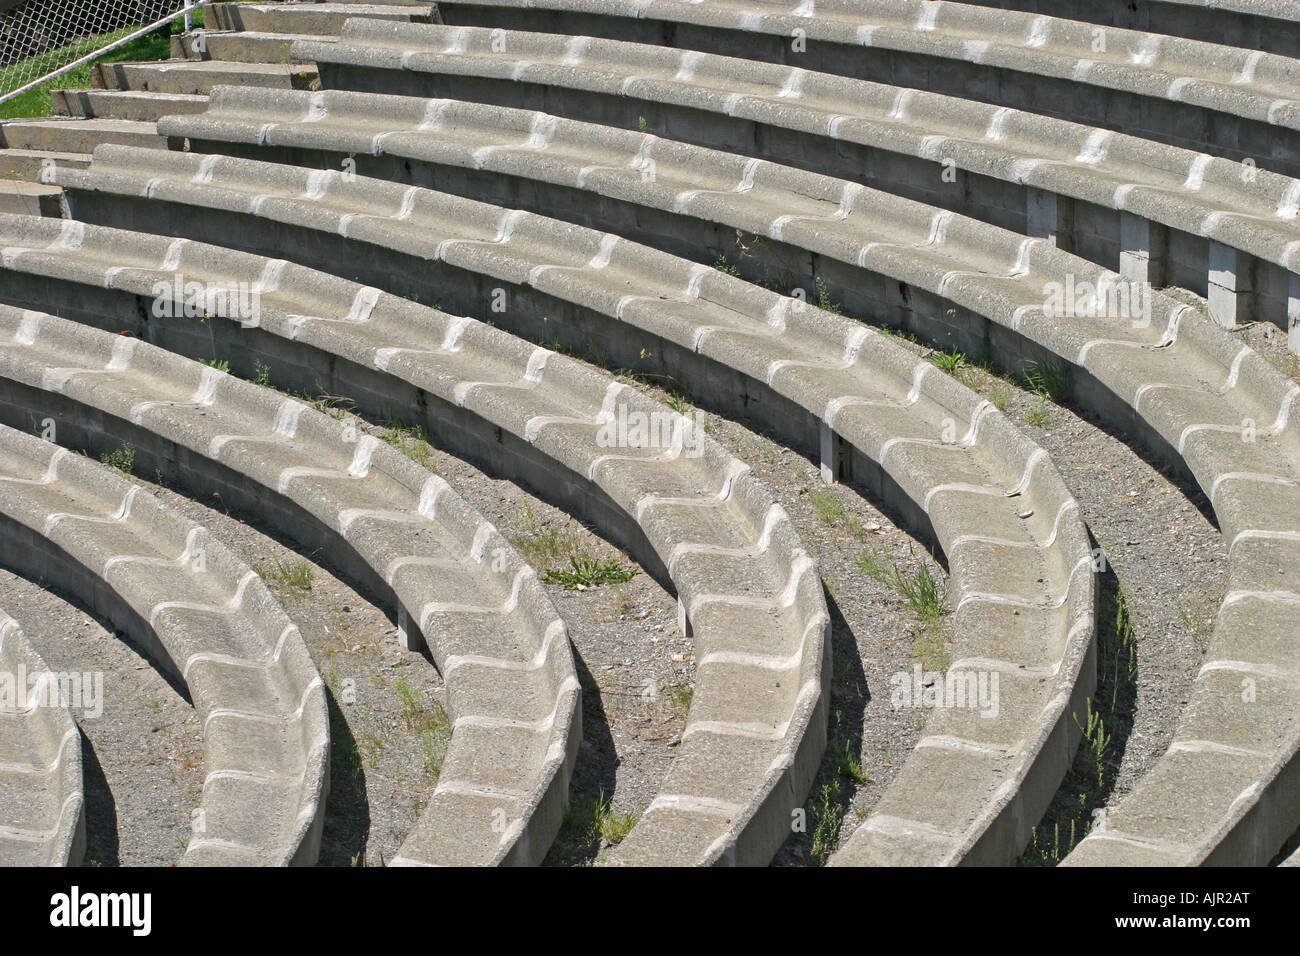 curved amphitheatre seating Stock Photo - Alamy